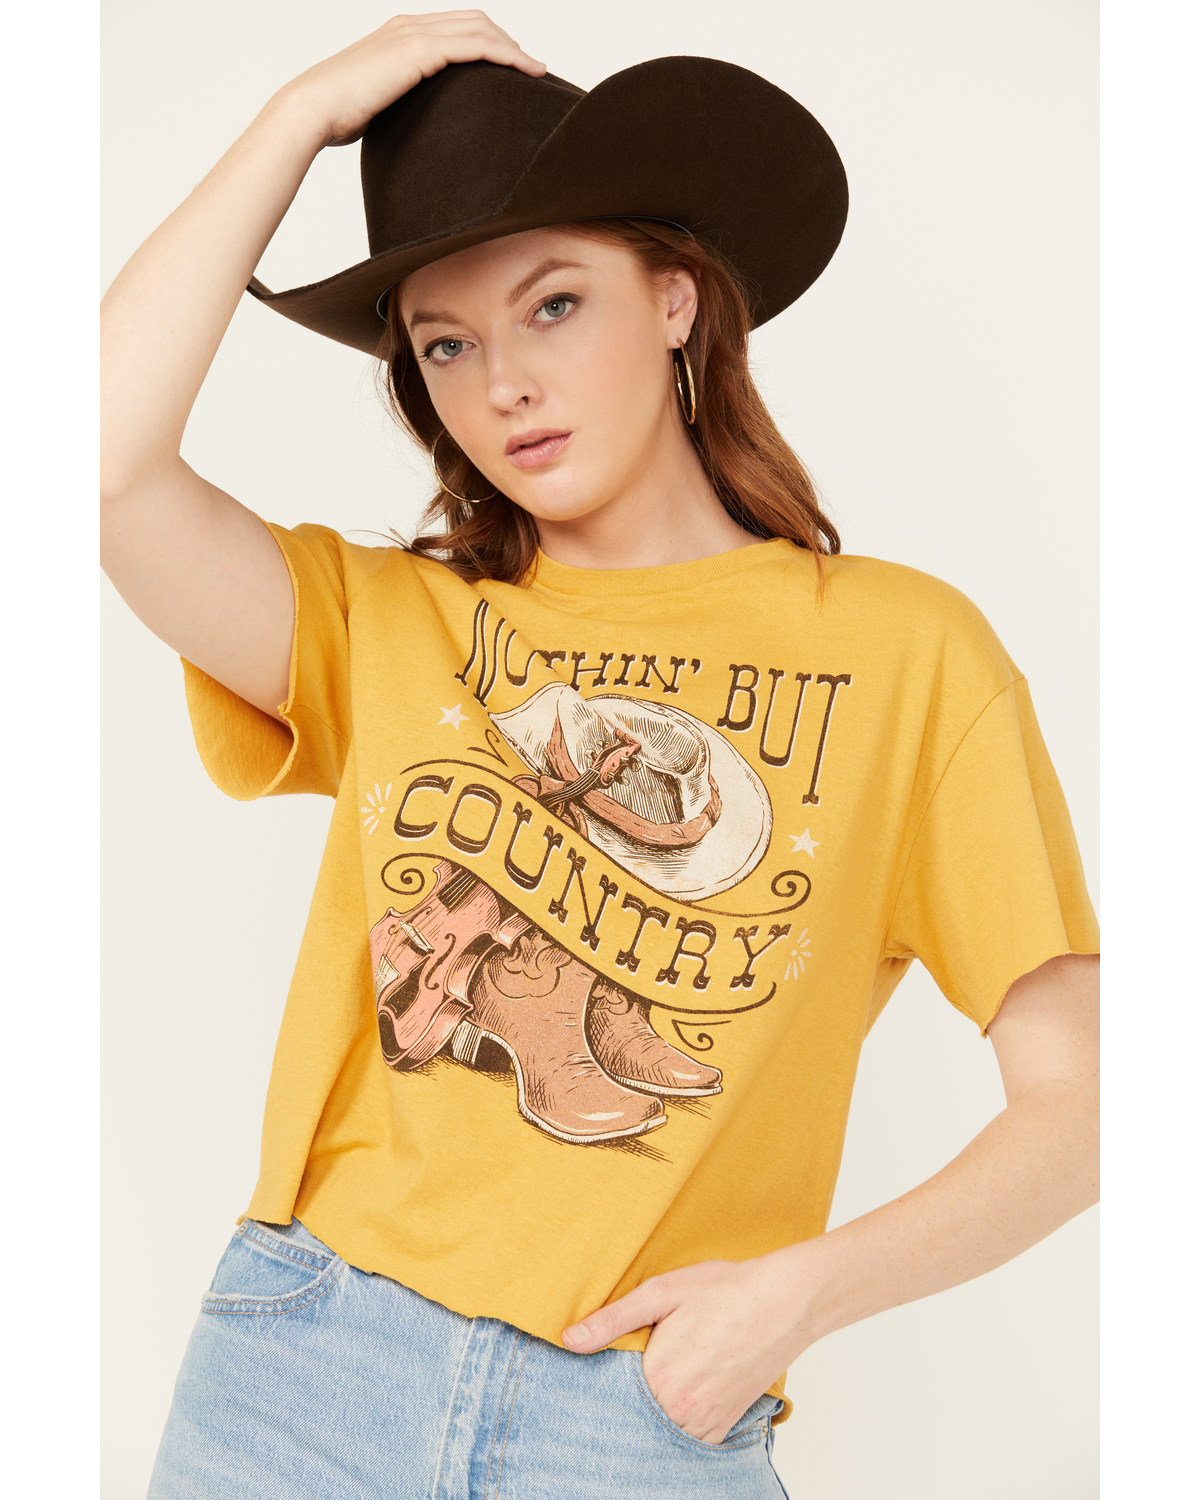 American Highway Women's Nothin But Country Short Sleeve Graphic Tee